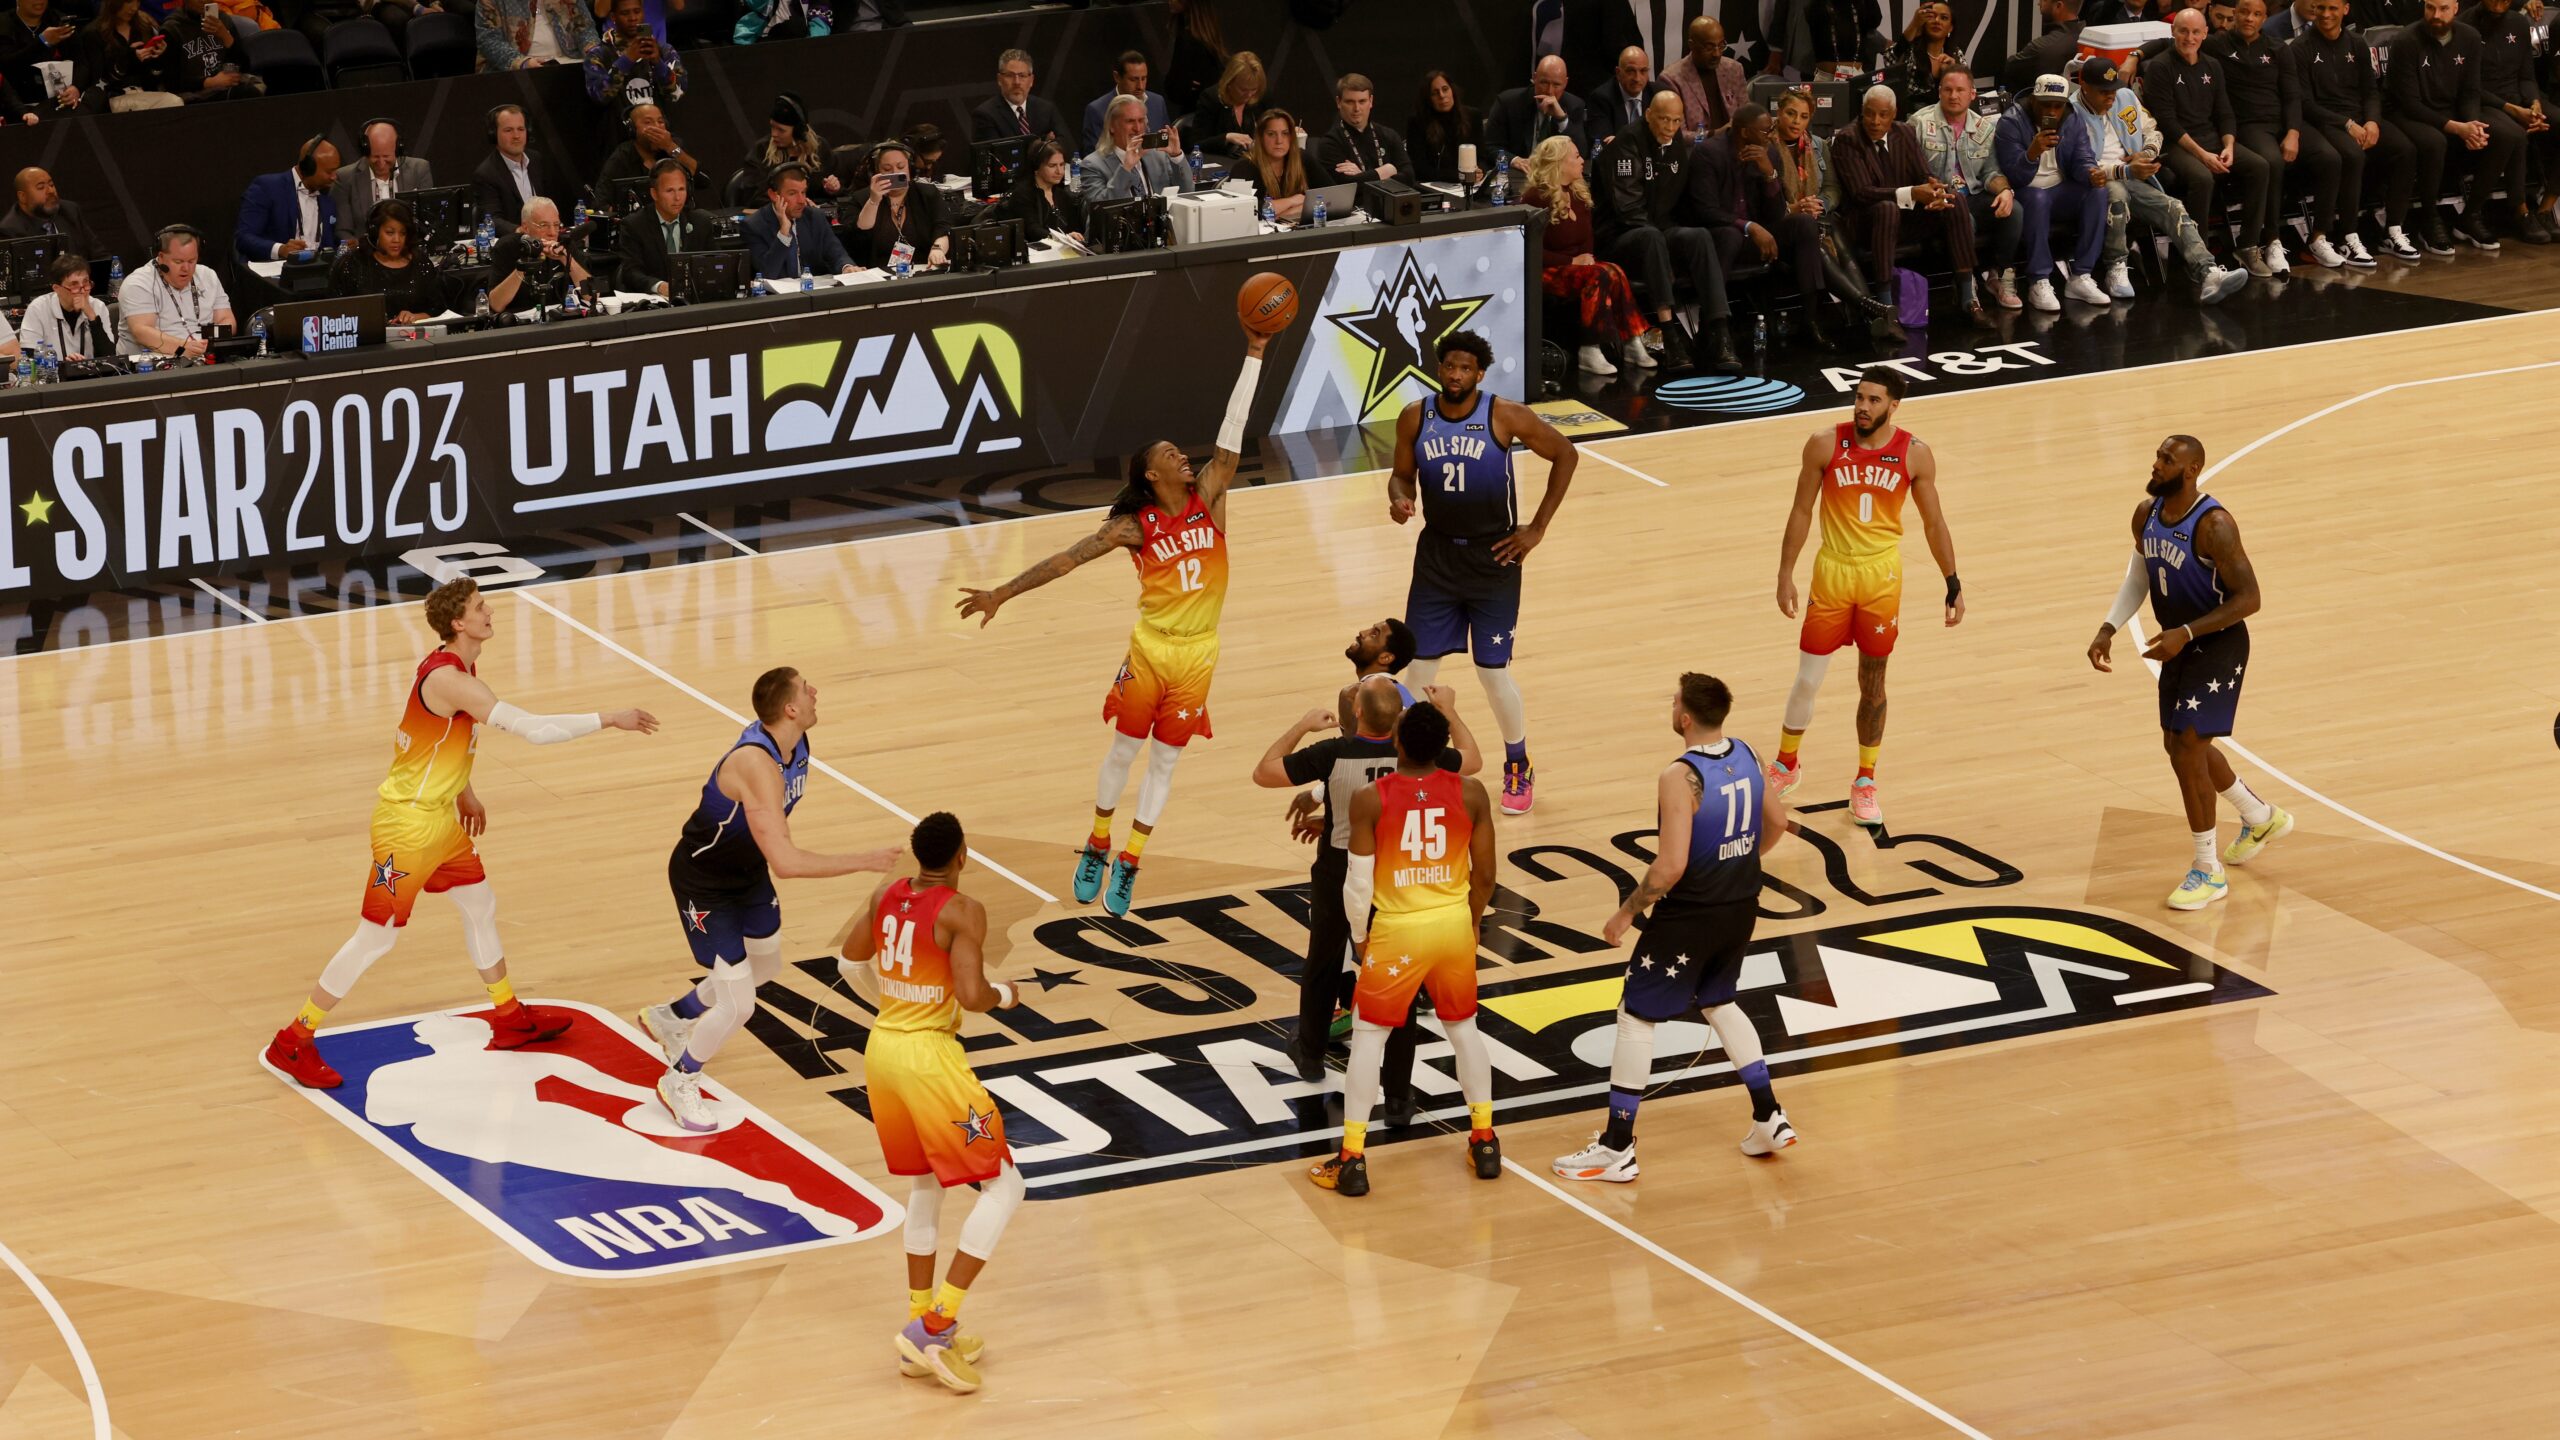 Inception - The NBA All-Star Game: Showcasing Basketball's Finest Talent